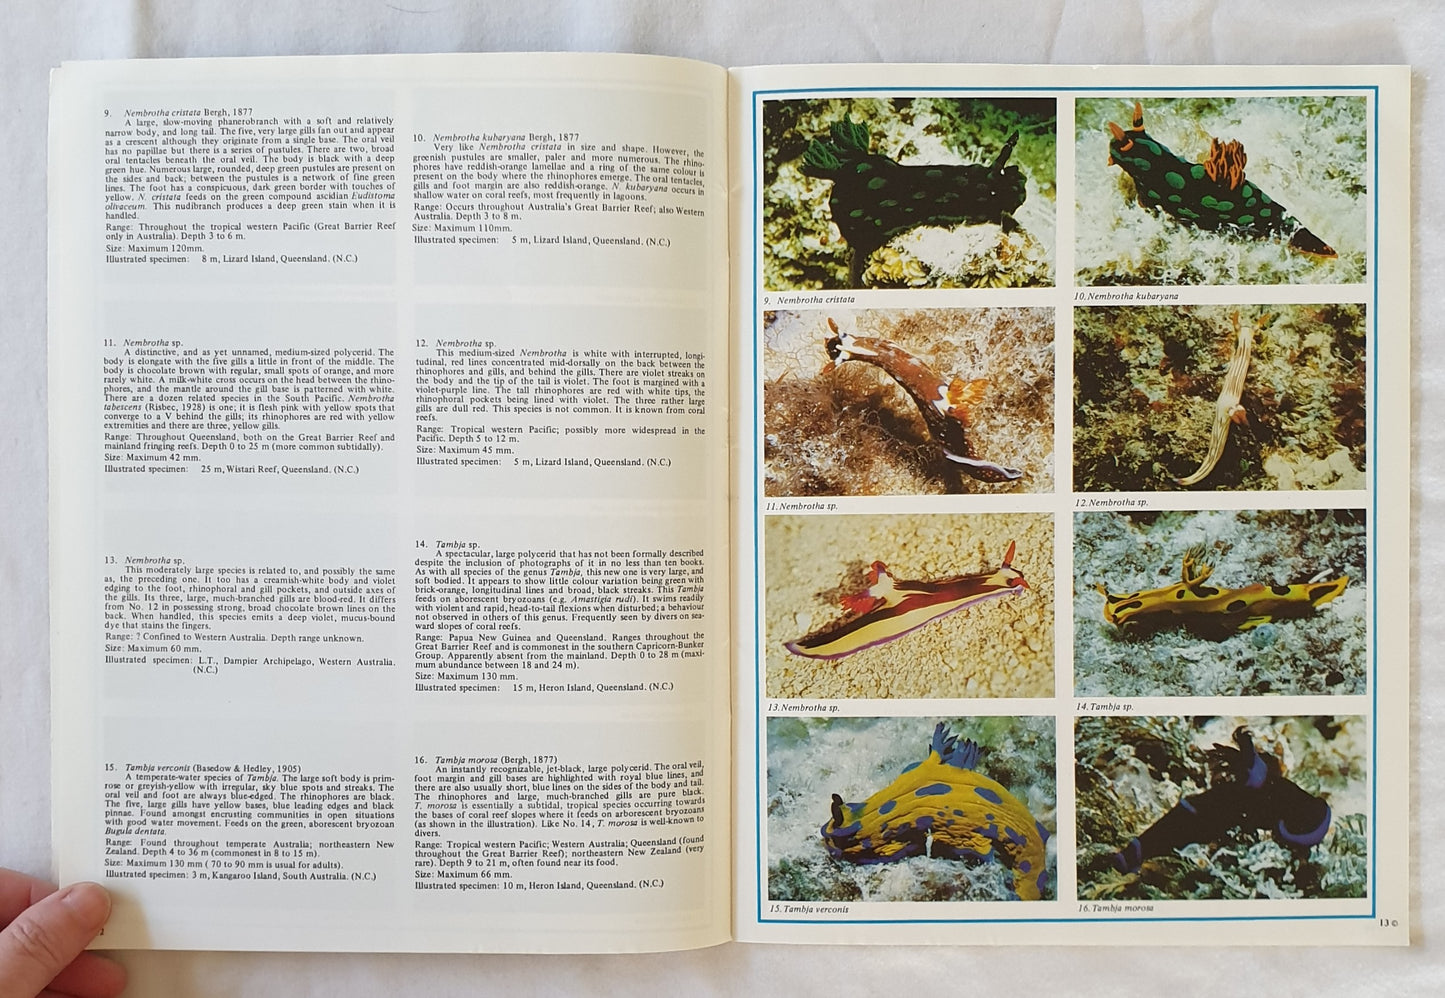 Nudibranchs of Australasia by Richard C. Willan and Neville Coleman